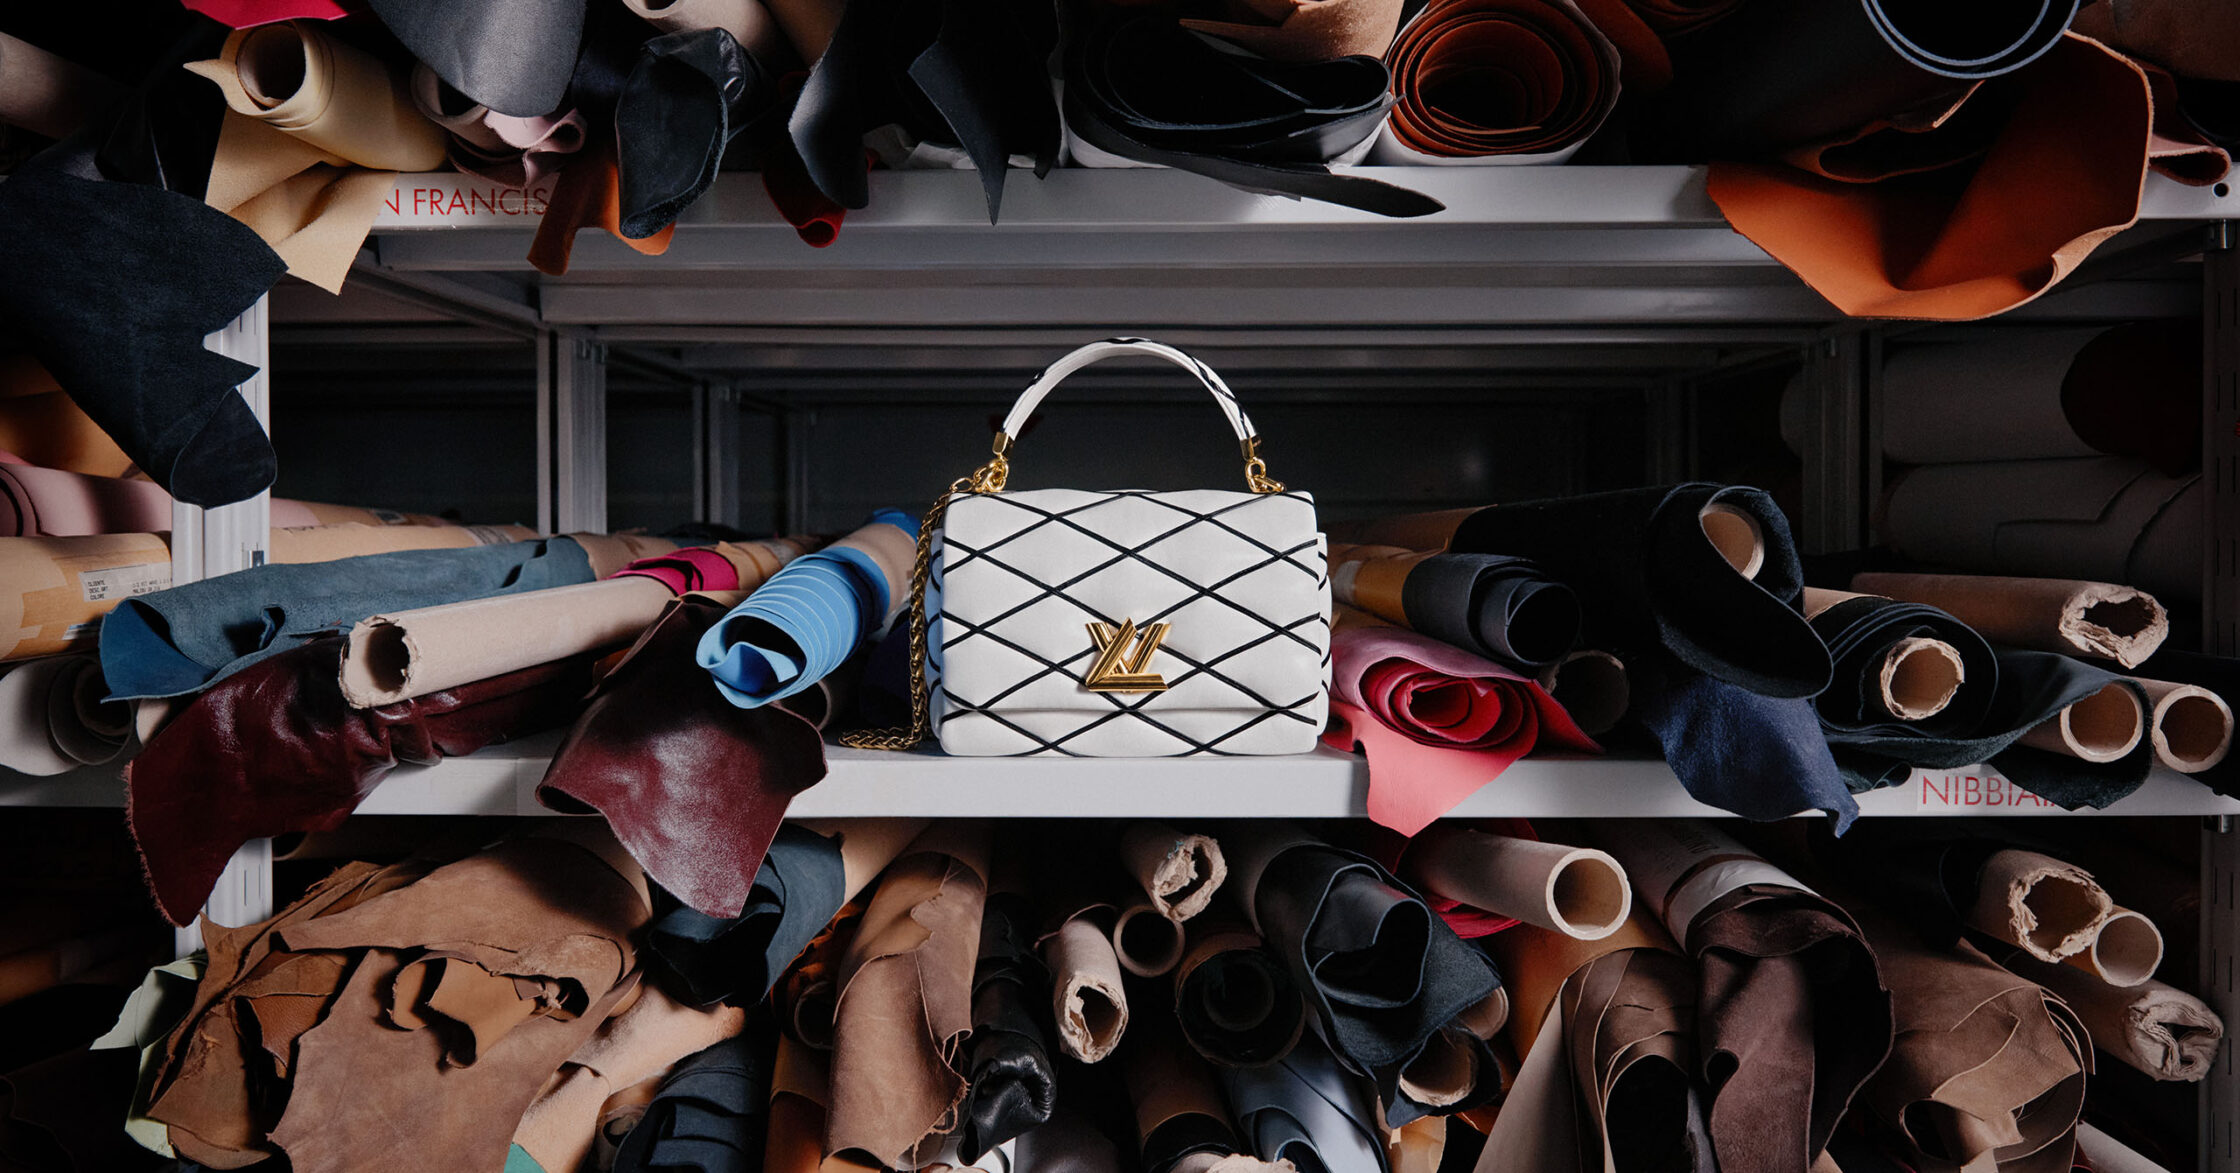 Louis Vuitton - Simplicity and elegance in design. The Vuitton New